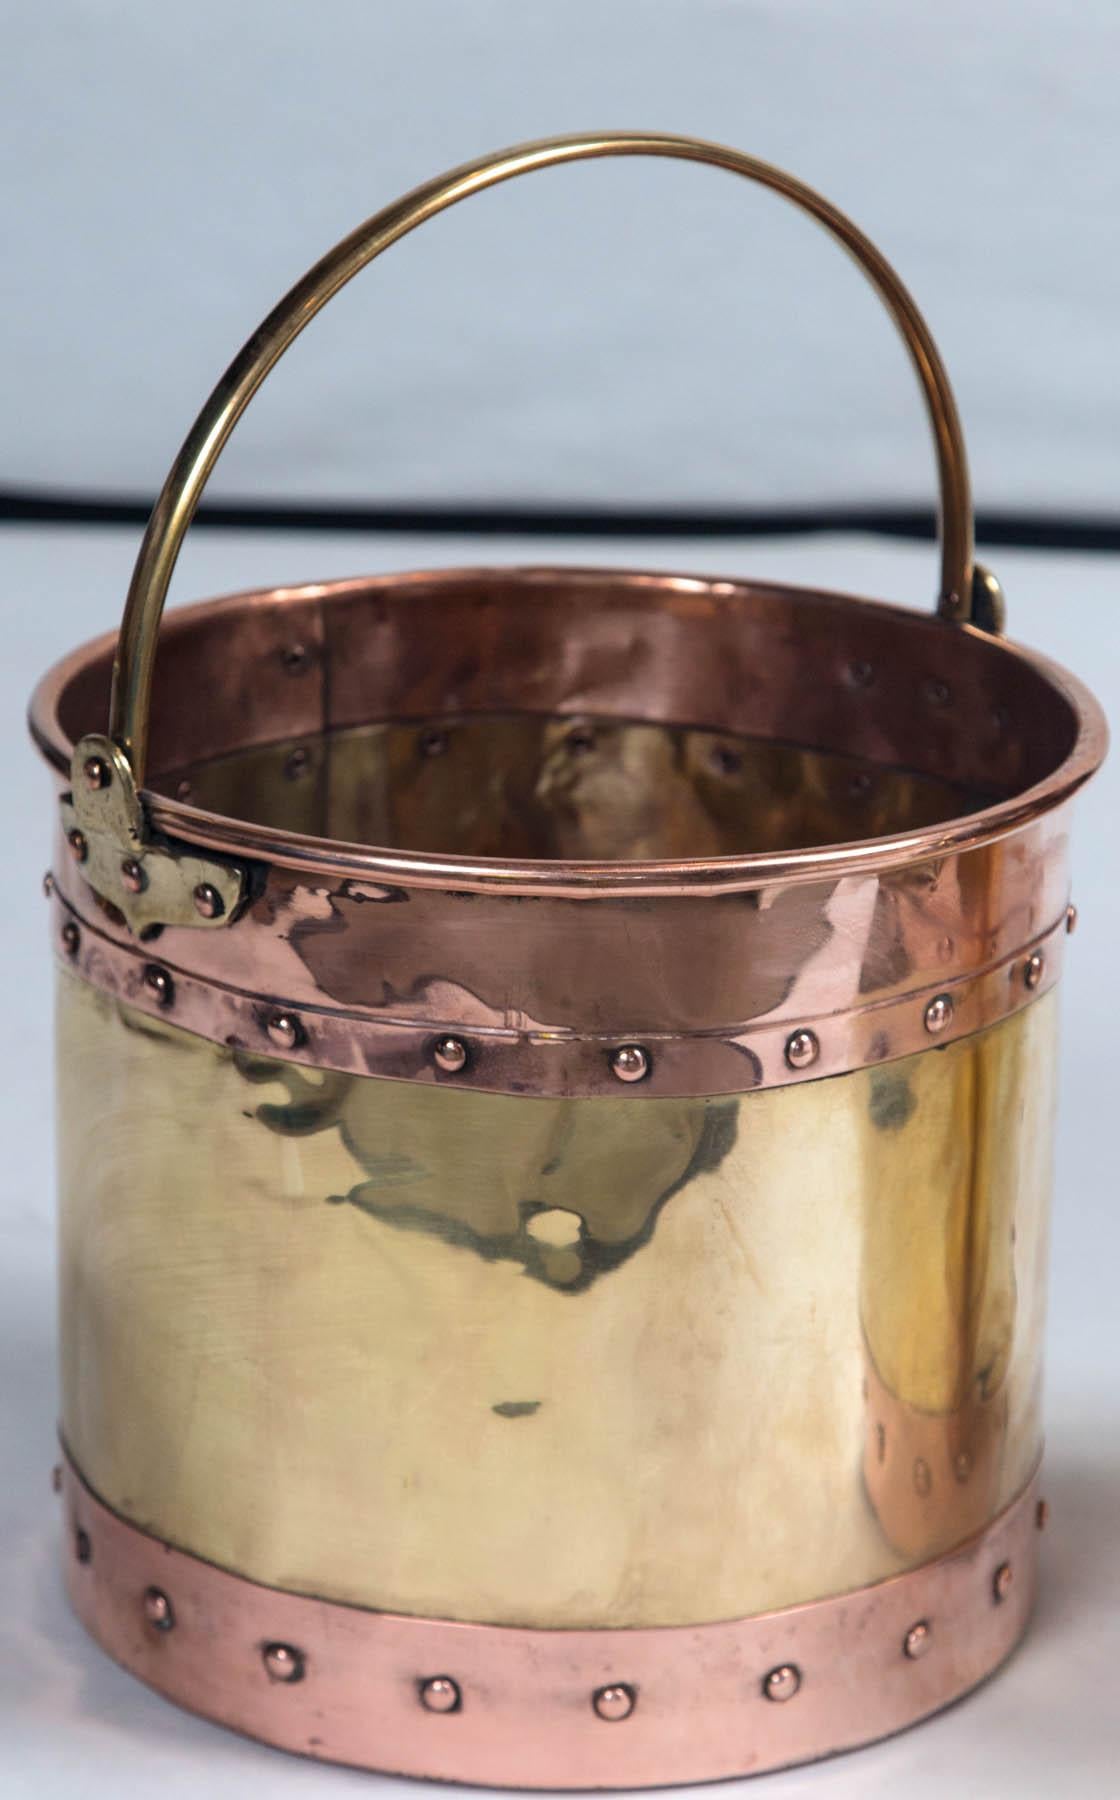 Vintage brass and copper buckets, England, circa early 20th century. Handcrafted with brass handles with riveted copper staves.